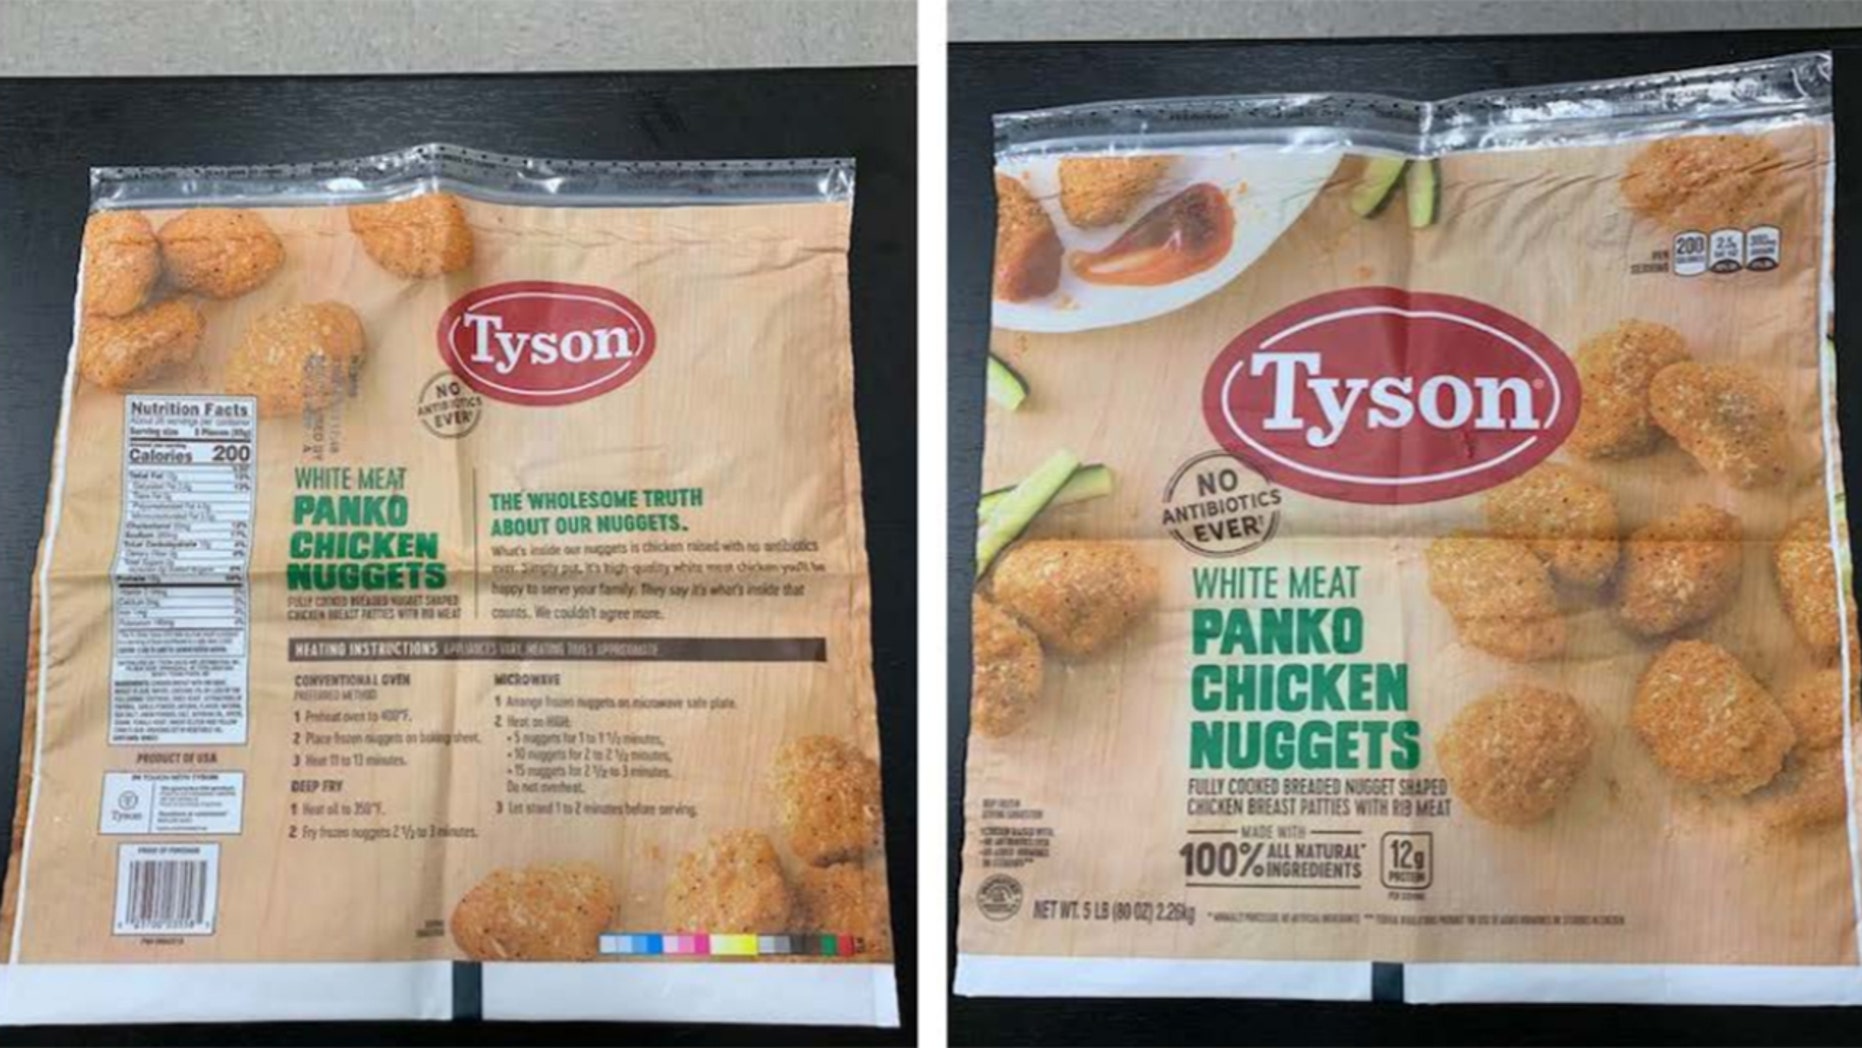 Tyson recalls 36,000 pounds of chicken nuggets after complaints about rubber in product